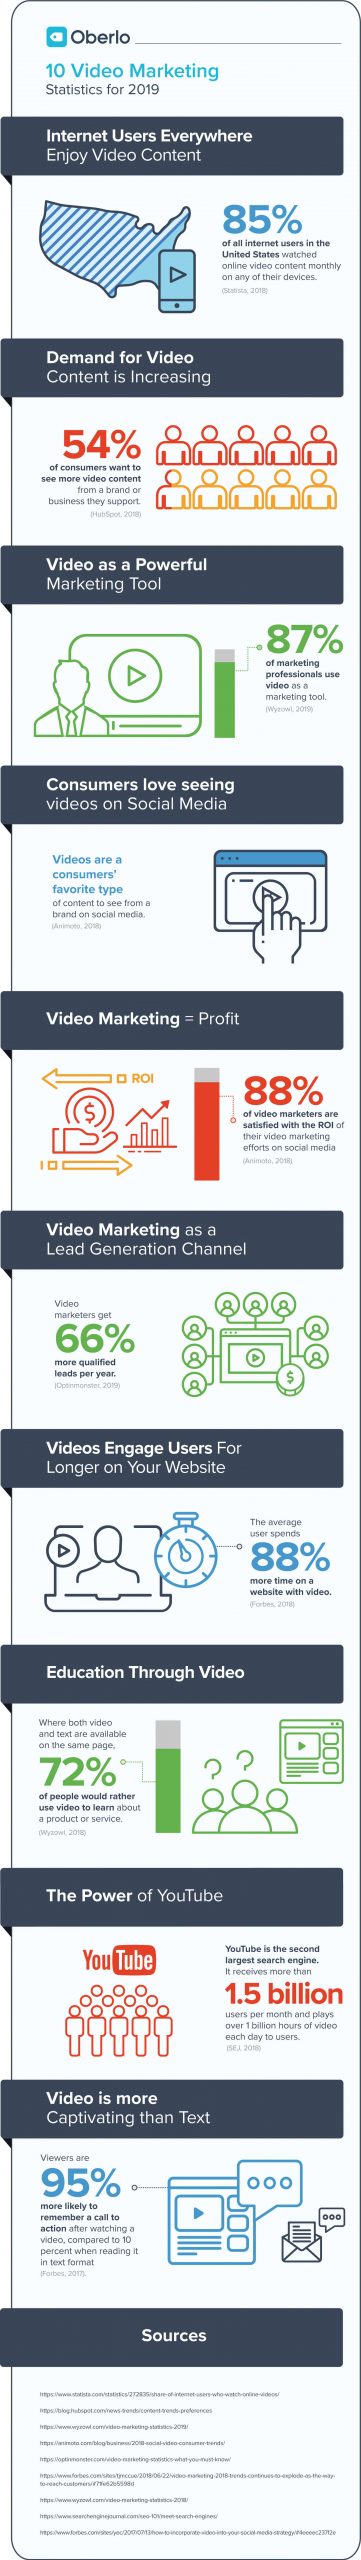 , 10 Video Marketing Statistics for 2019 [Infographic], TornCRM